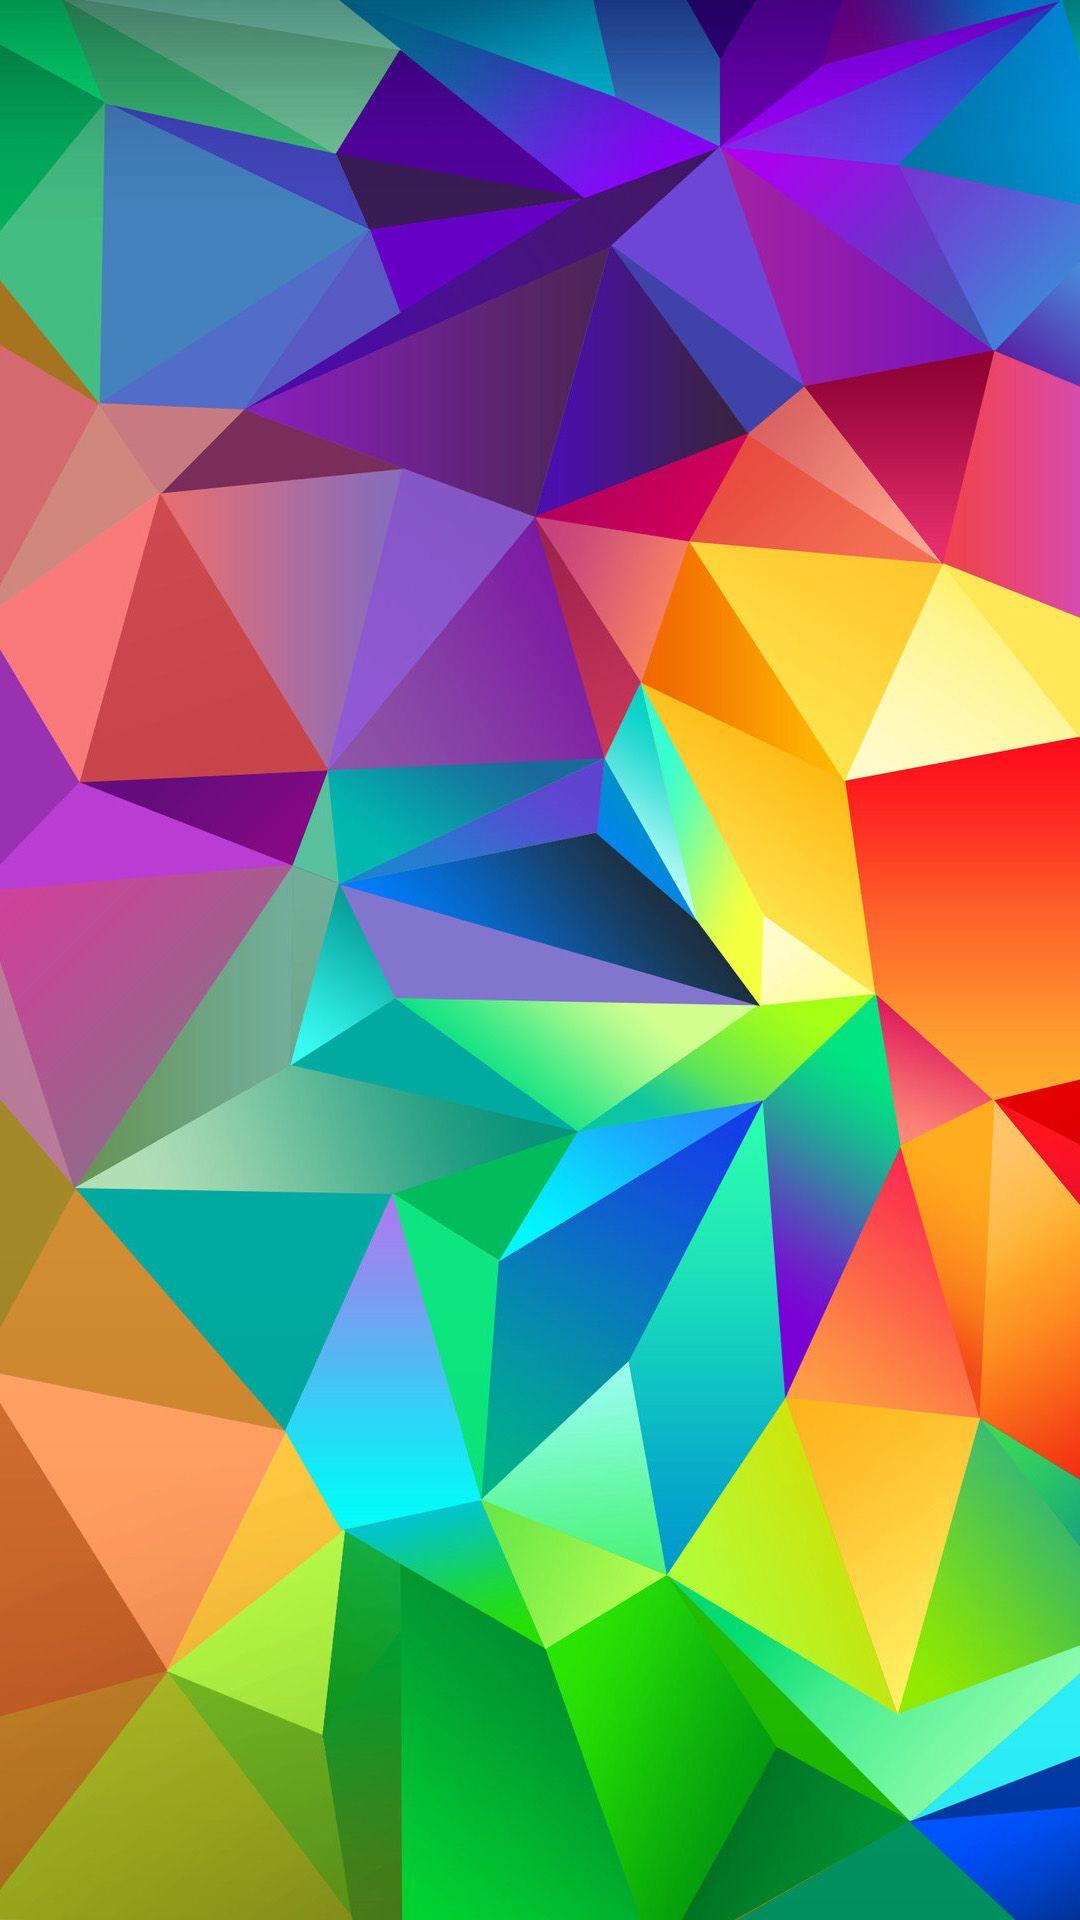 3D & Abstract Colorful Abstraction wallpaper Desktop, Phone